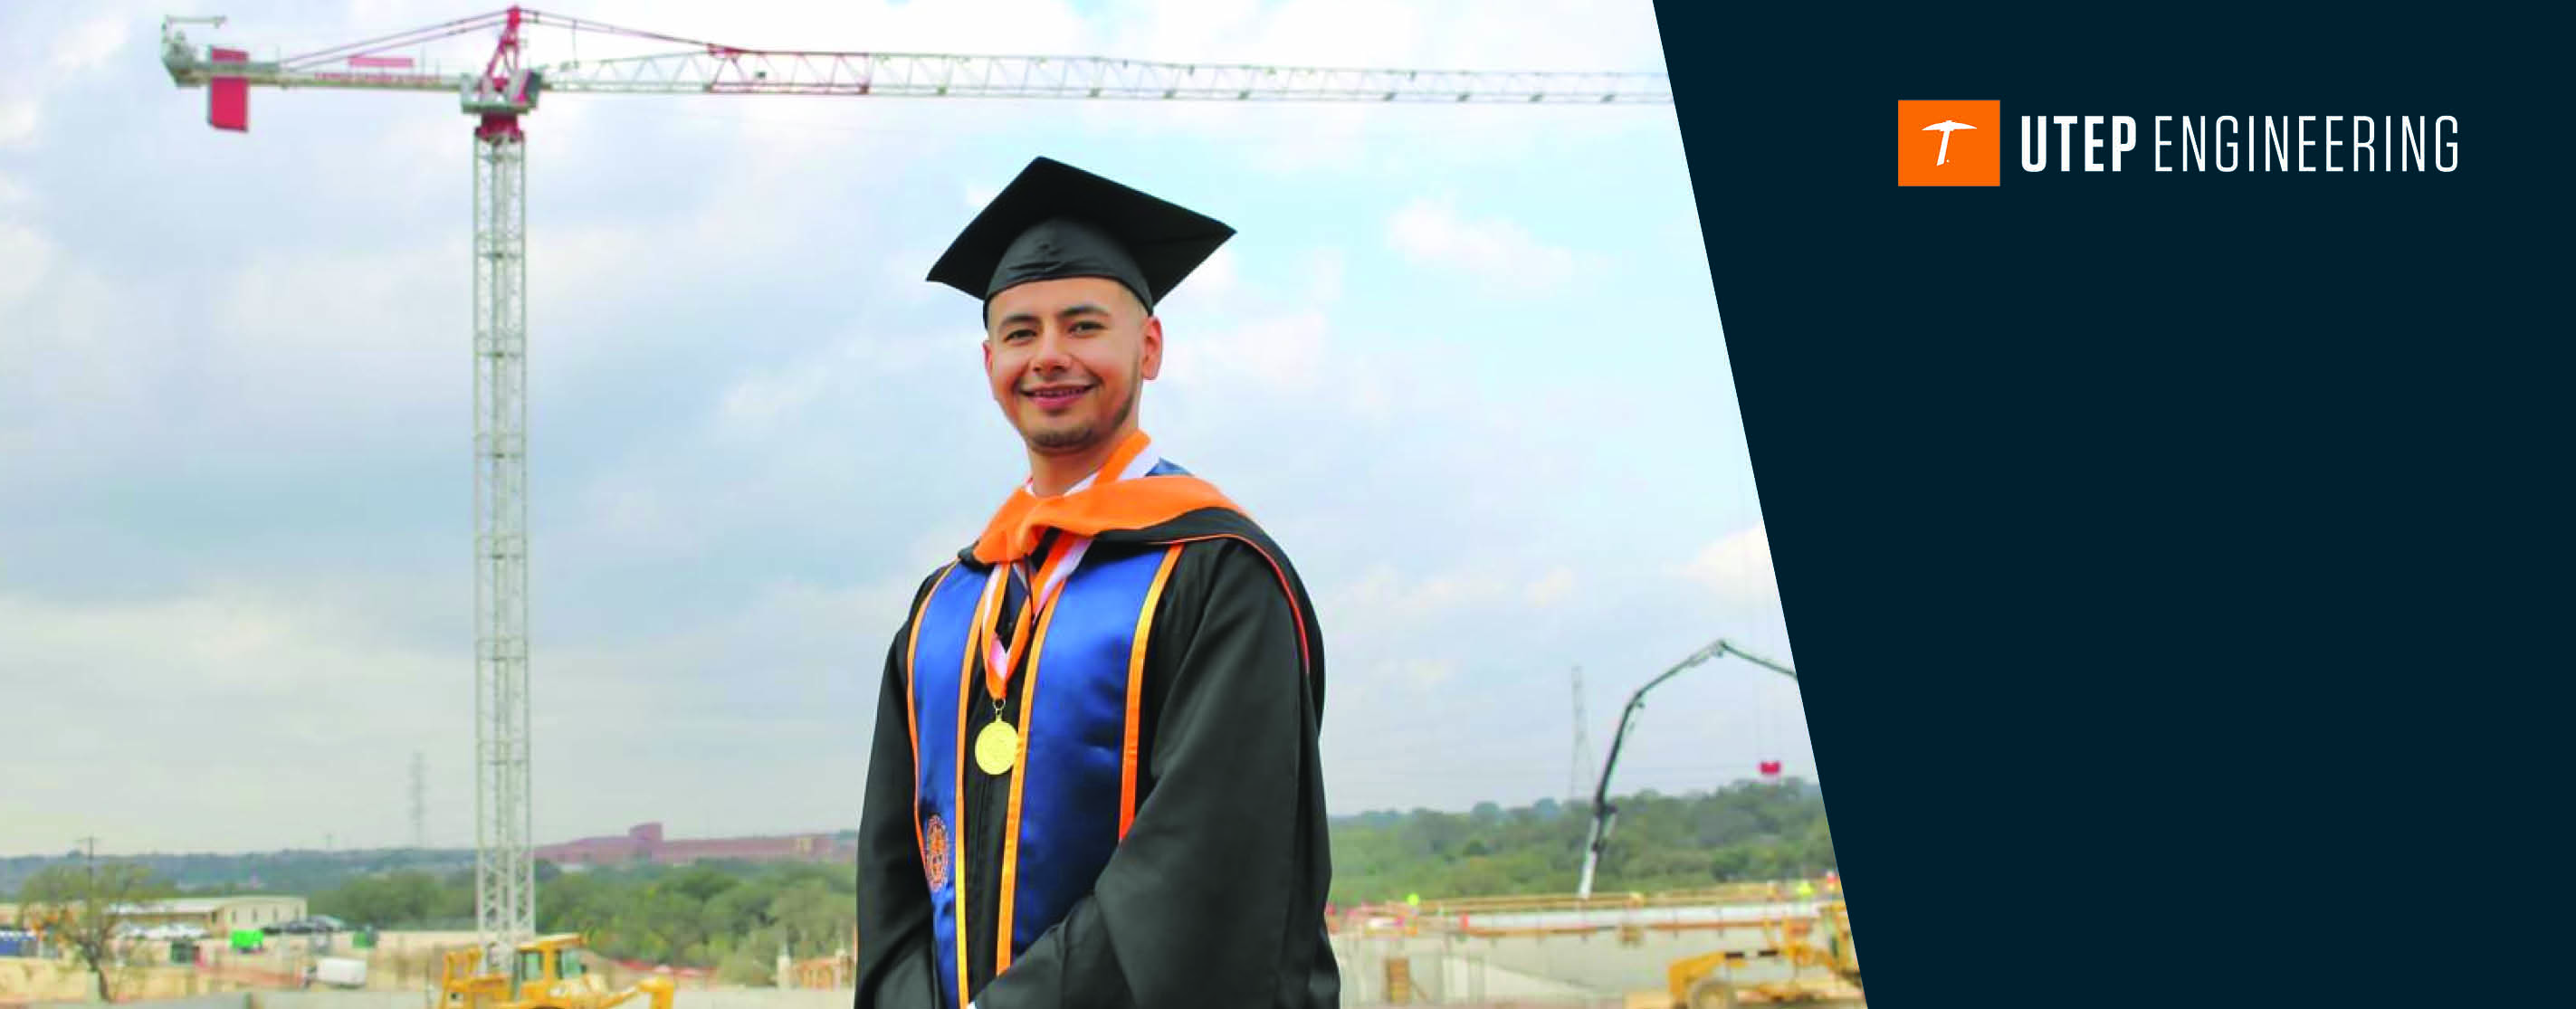 UTEP’s Online Master’s in Construction Management Ranked No. 2 